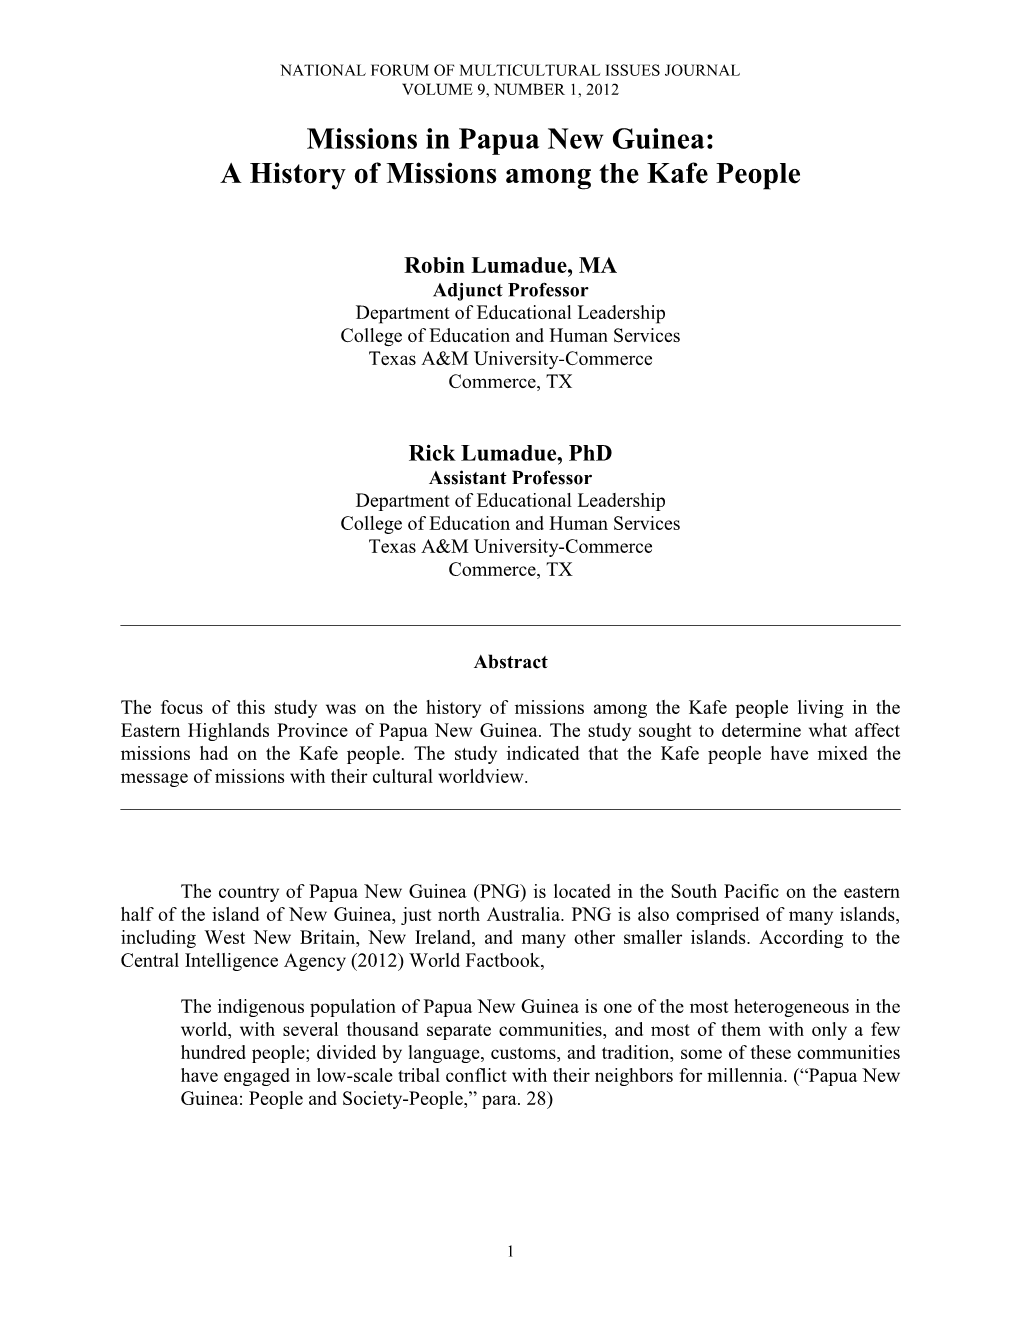 Missions in Papua New Guinea: a History of Missions Among the Kafe People